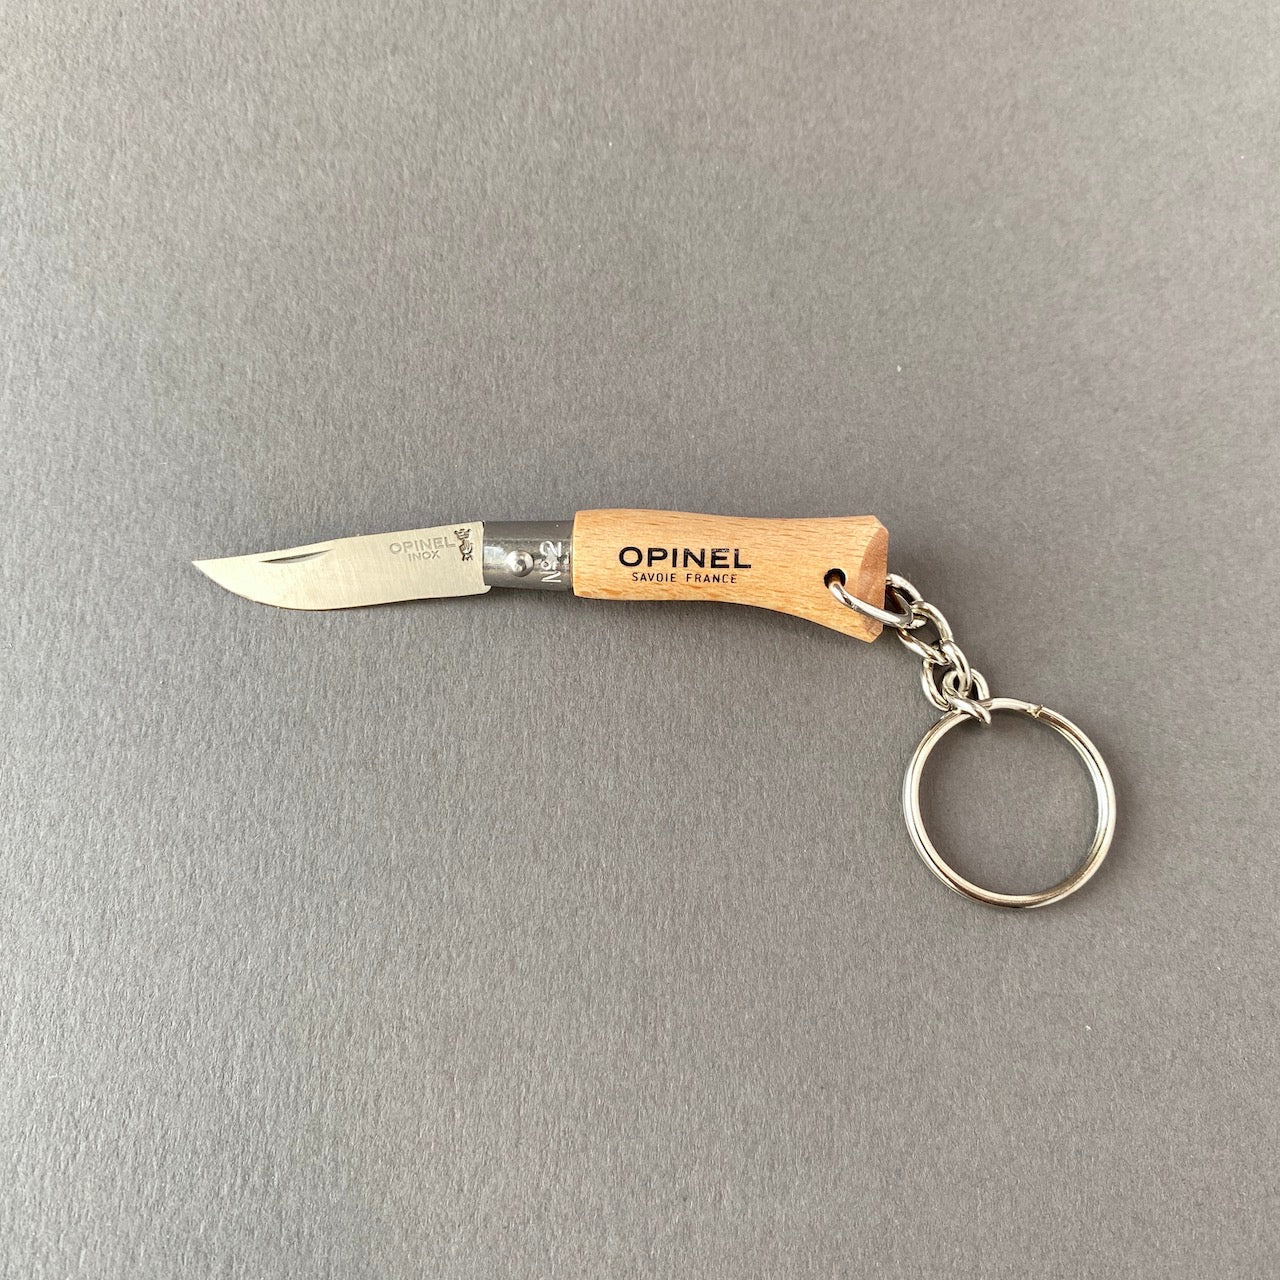 Small key chain pocket knife made out of beech wood with stainless steel blade connected to key ring with small chain-folded open